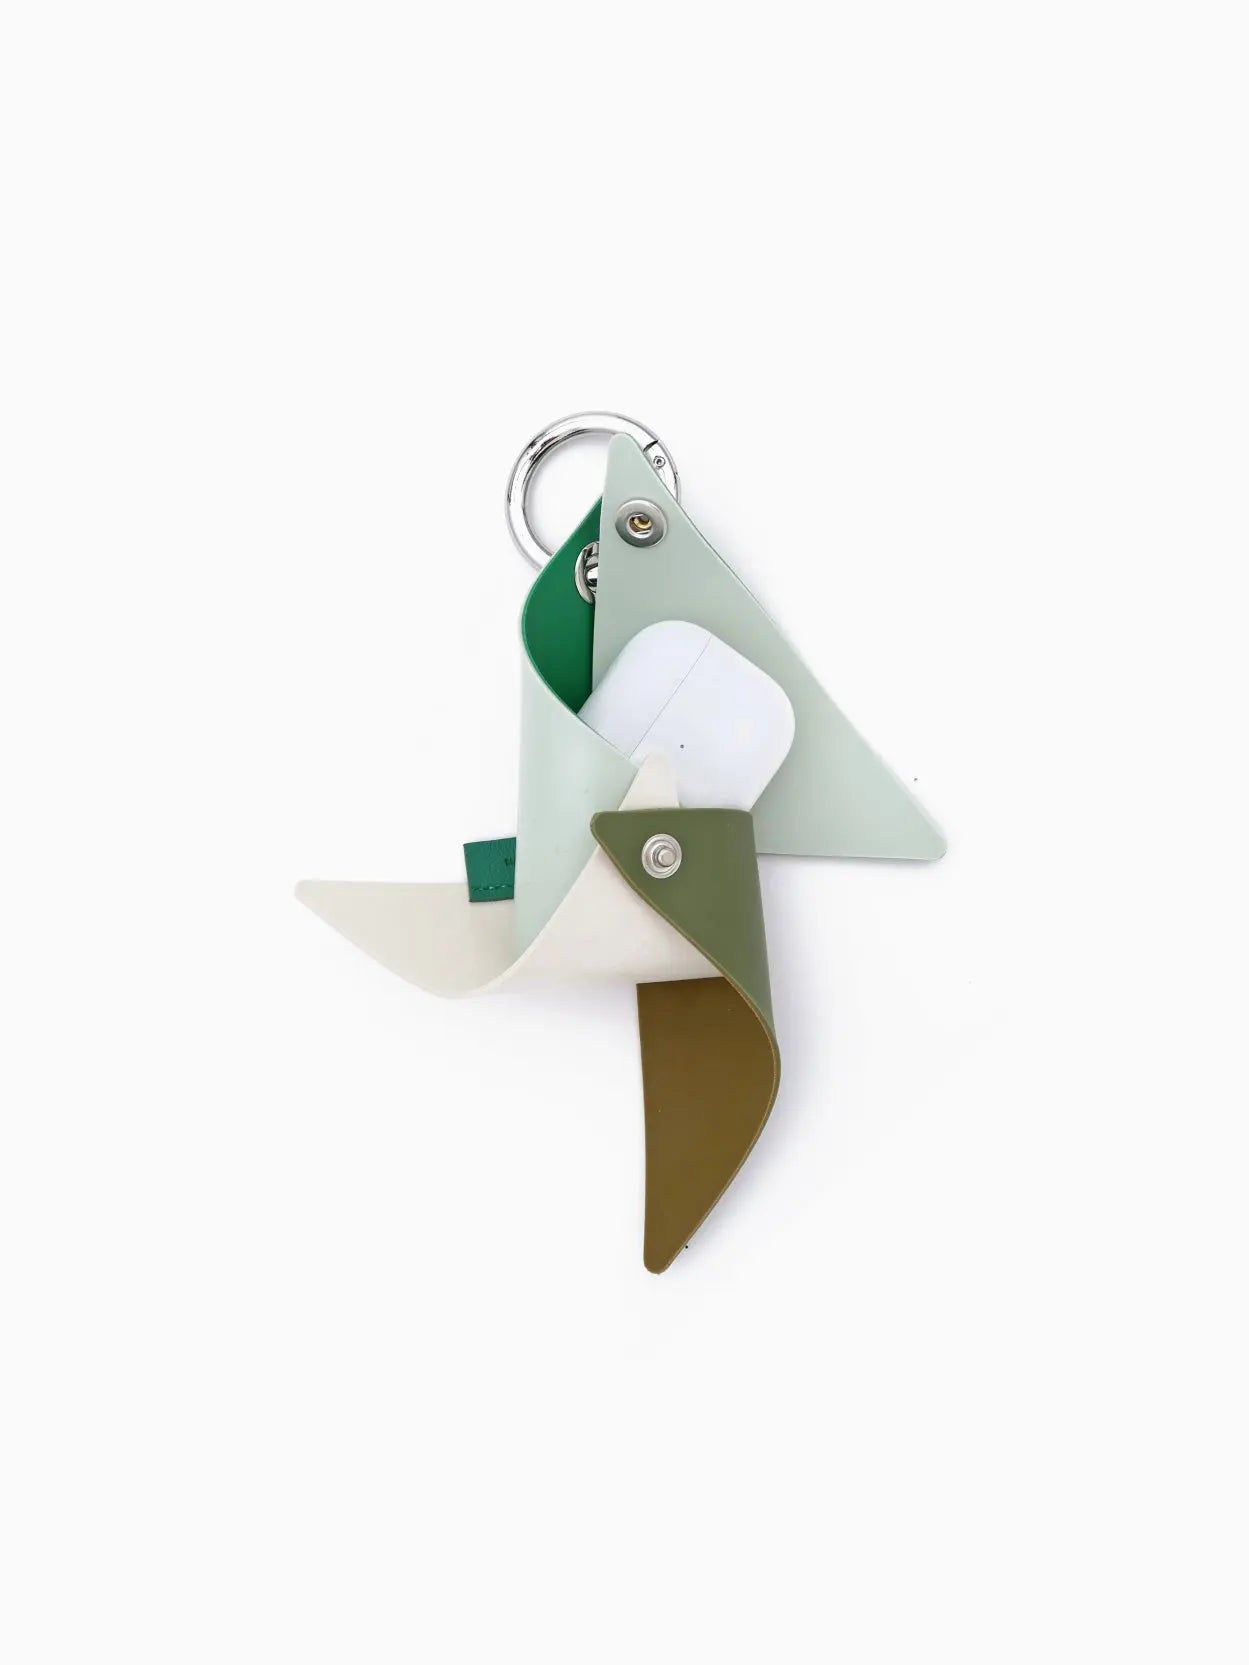 A minimalist, abstract sculpture from Barcelona, made from four folded, colored metal sheets in green, white, and brown attached to a circular metallic ring. It creates a pinwheel-like appearance and is set against a plain white background. The Sunnei Gomma Girandola Airpods Holder Multi Grass Green is available exclusively at Bassalstore.